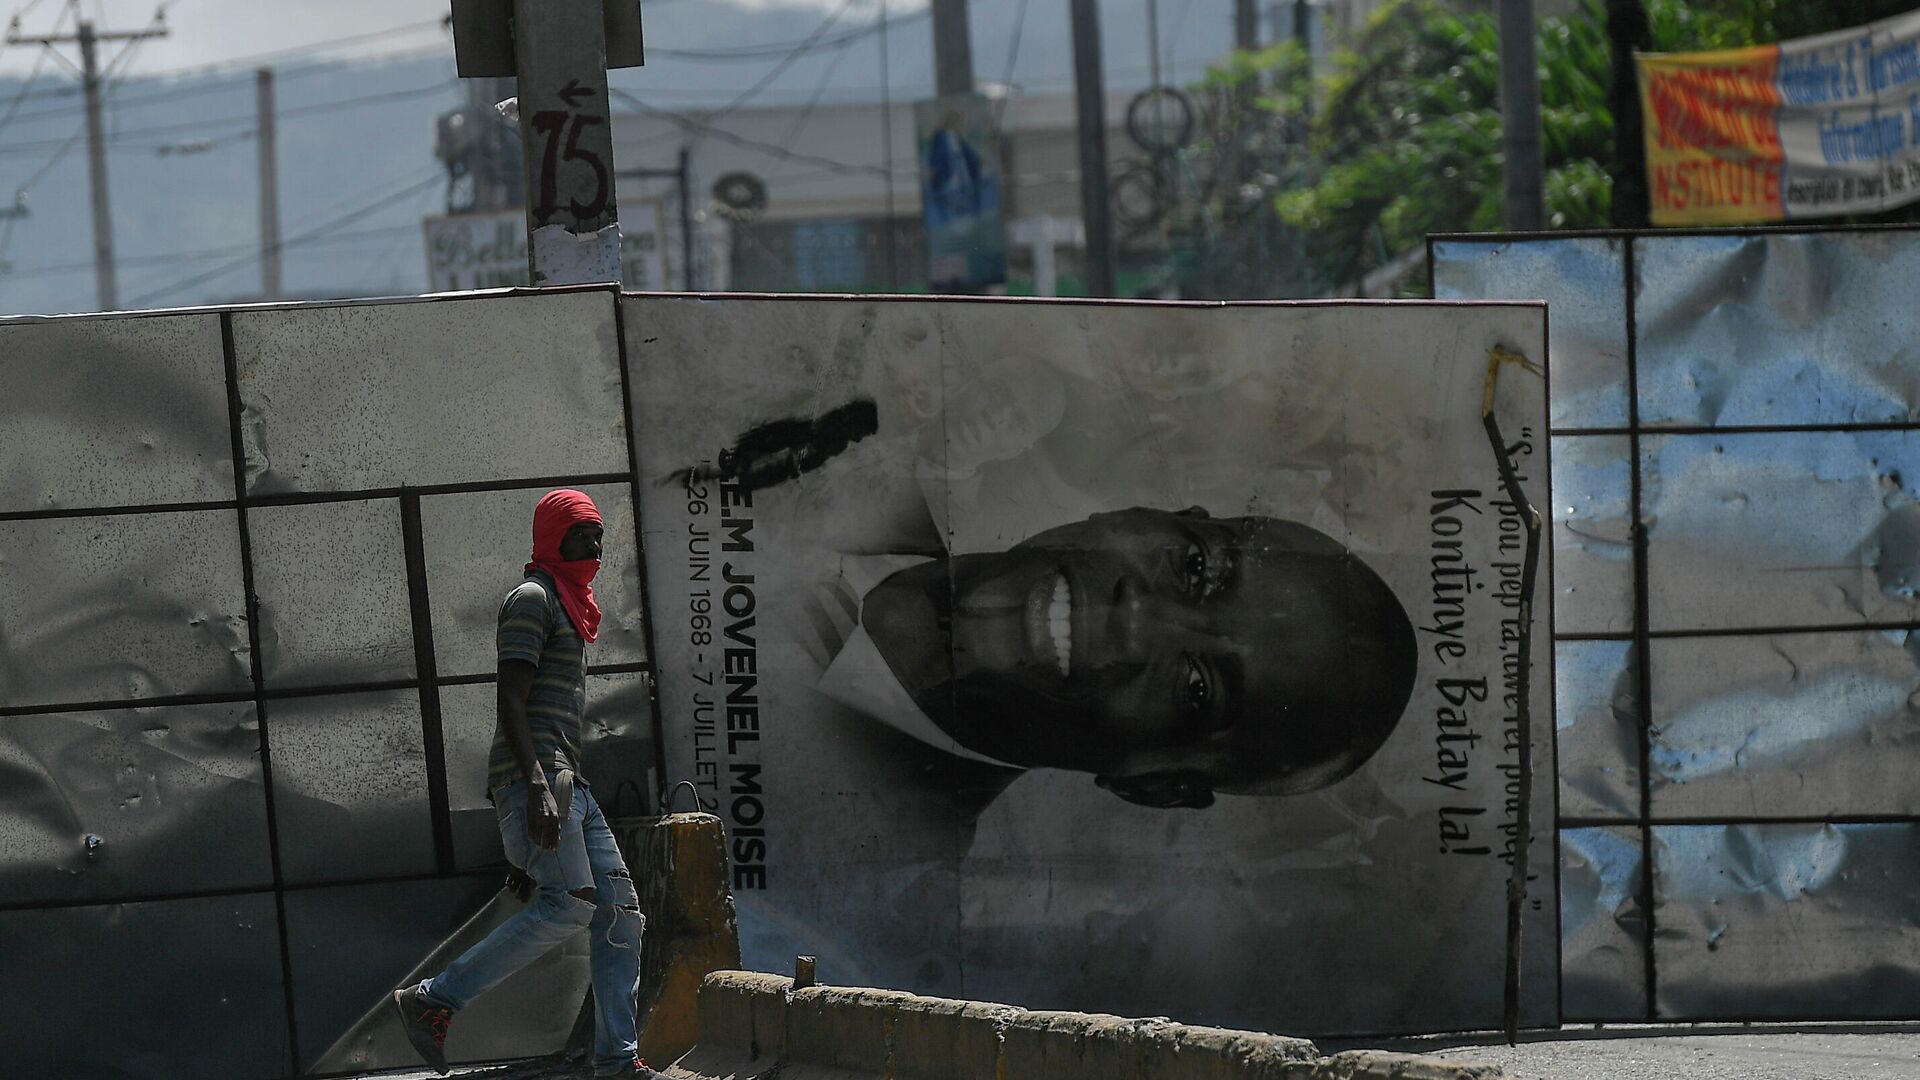 A billboard of slain Haitian President Jovenel Moise is used to block a road during an anti-government protest in Port-au-Prince, Haiti, Thursday, Oct. 21, 2021. - Sputnik International, 1920, 15.01.2022